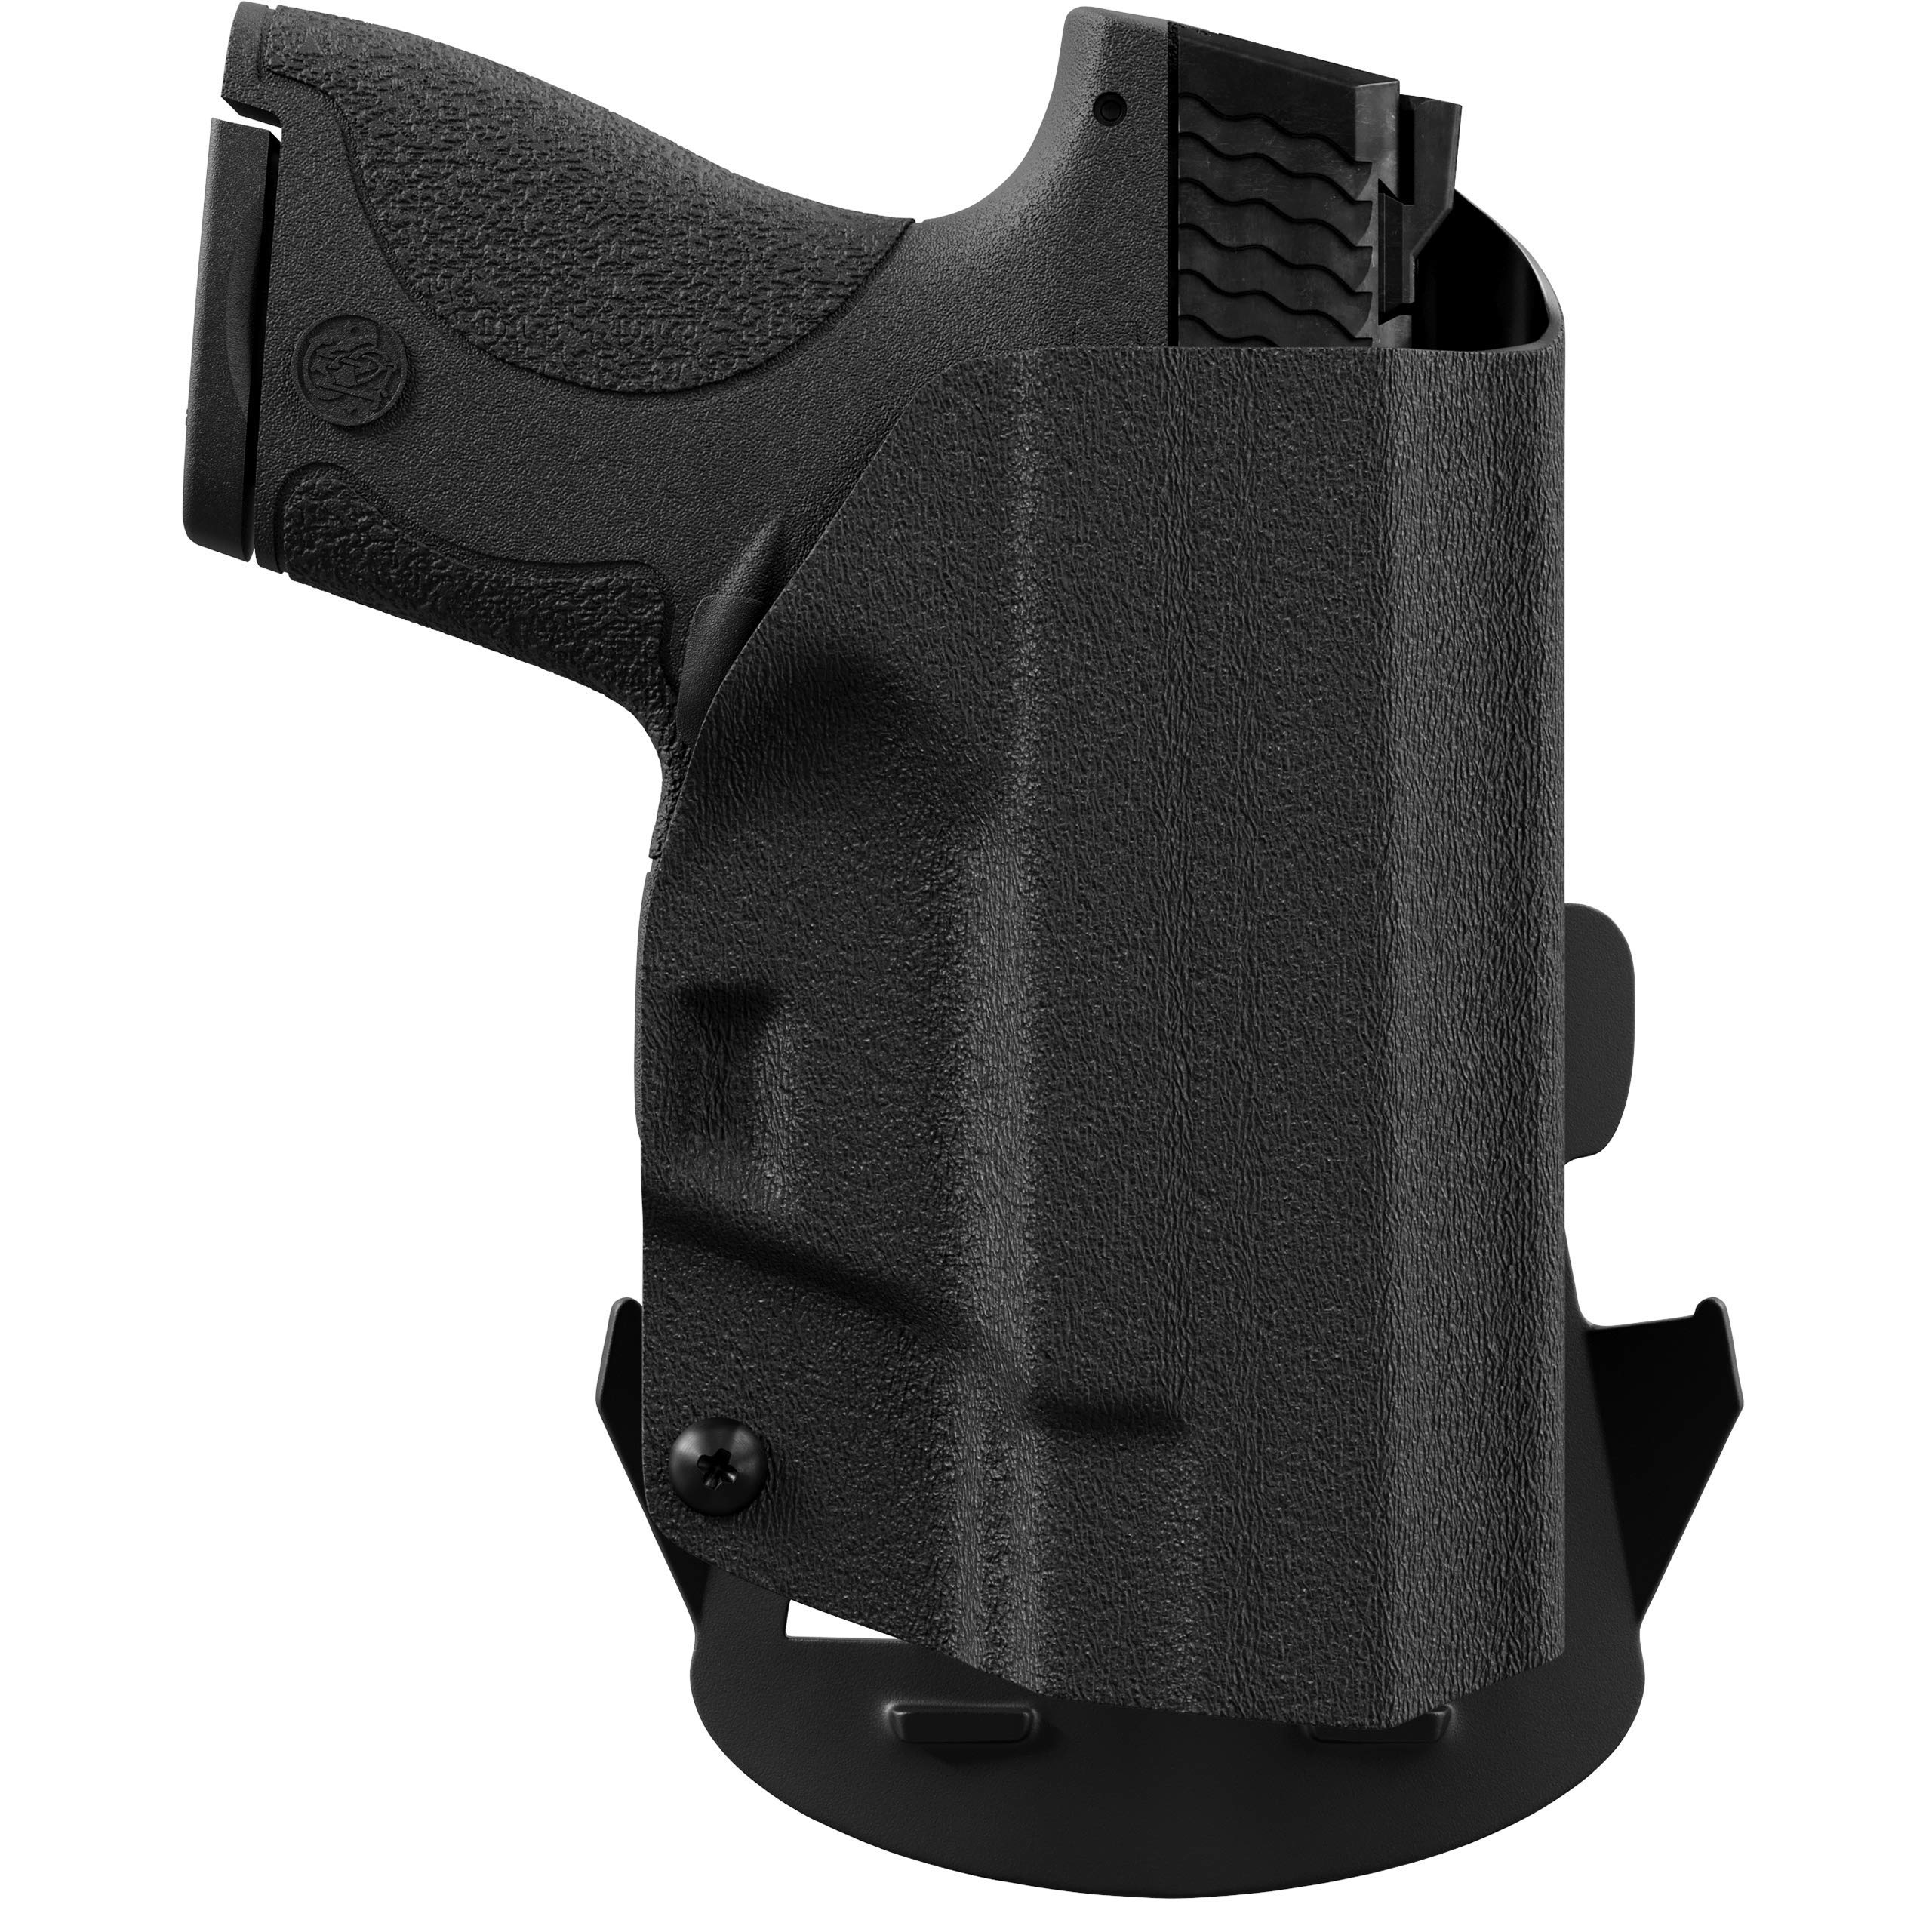 We The People Holsters - Black - Left Hand - OWB Holster compatible with Smith Wesson MP Bodyguard 380